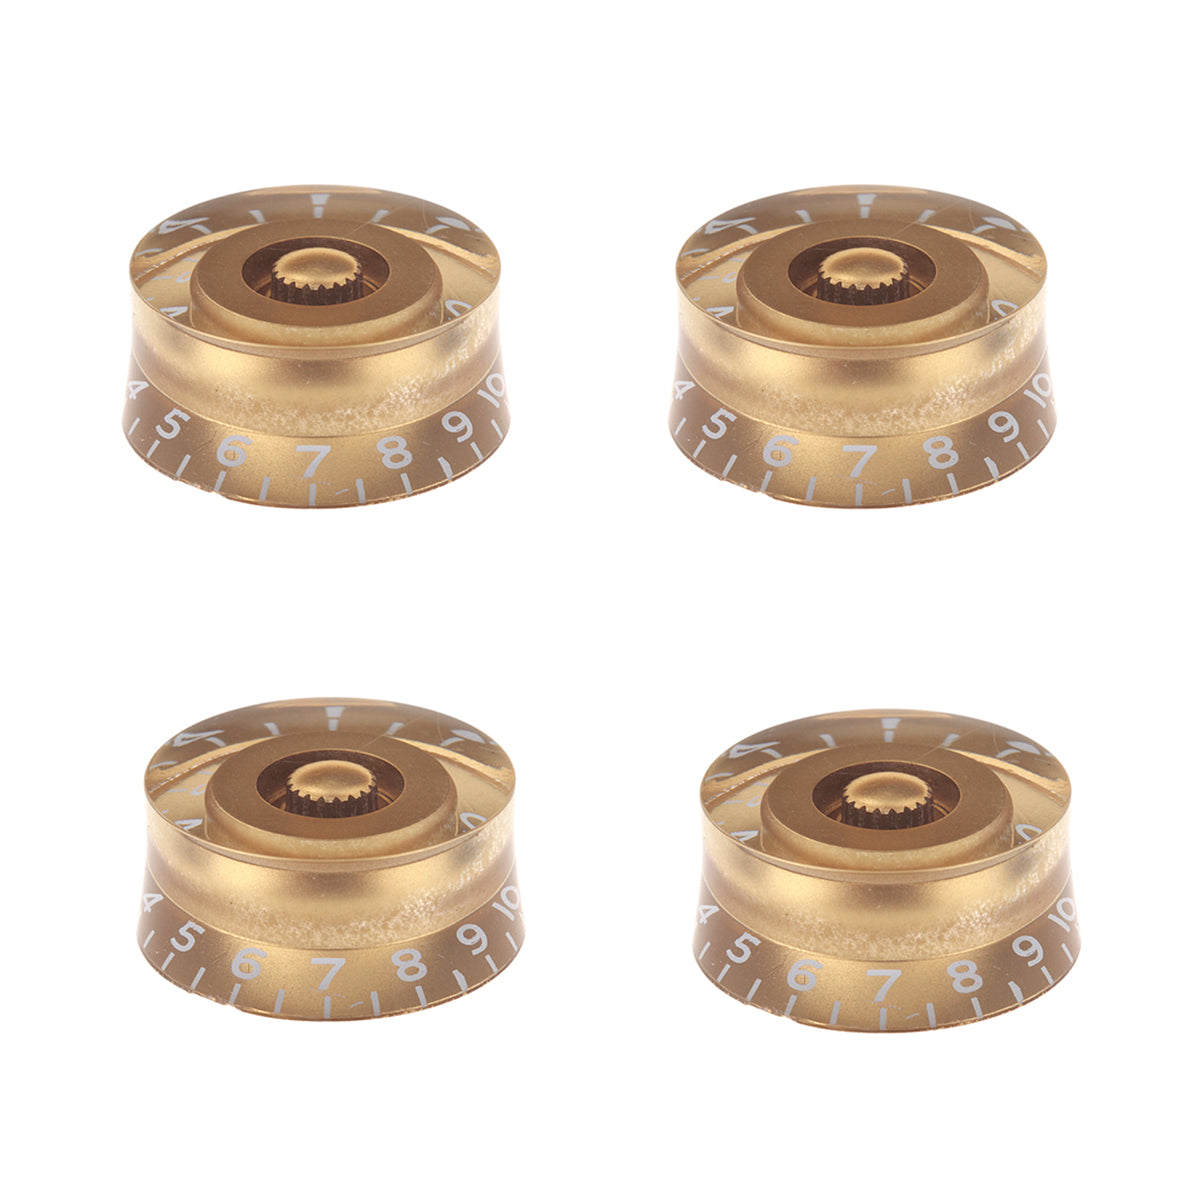 Musiclily Metric 6mm Plastic LP Style Guitar Speed Control Knobs ,Gold ( 4 Pieces)